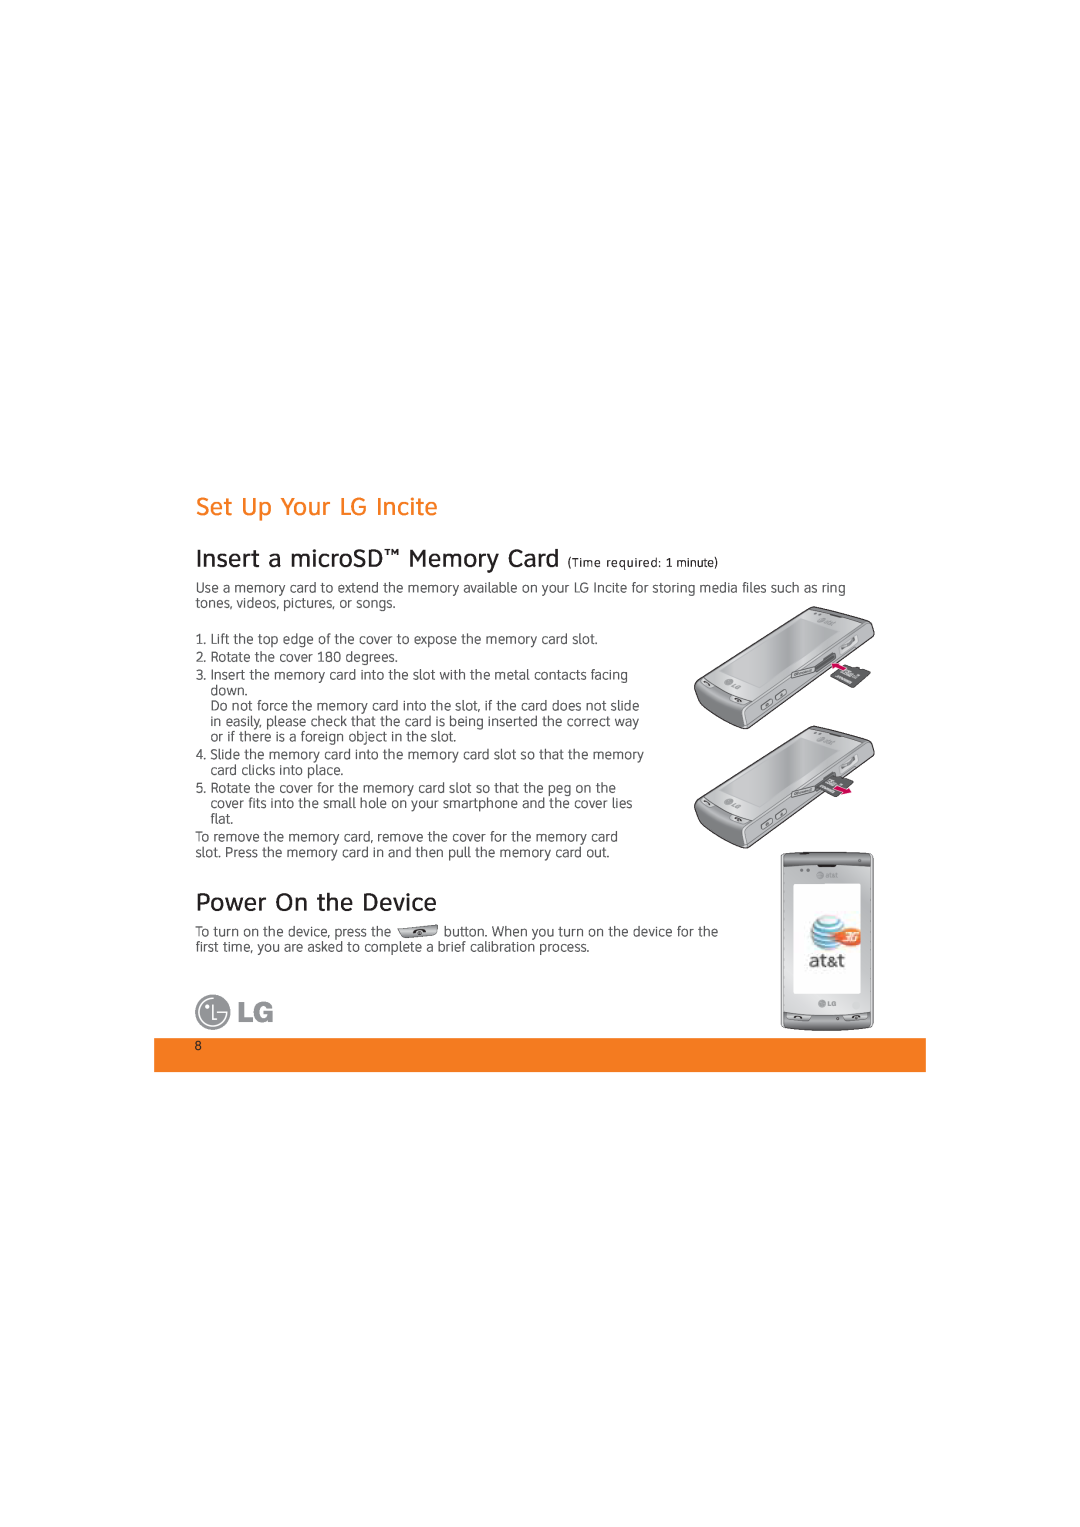 LG Electronics MCD0009405 Set Up Your LG Incite, Insert a microSD Memory Card Time required 1 minute, Power On the Device 